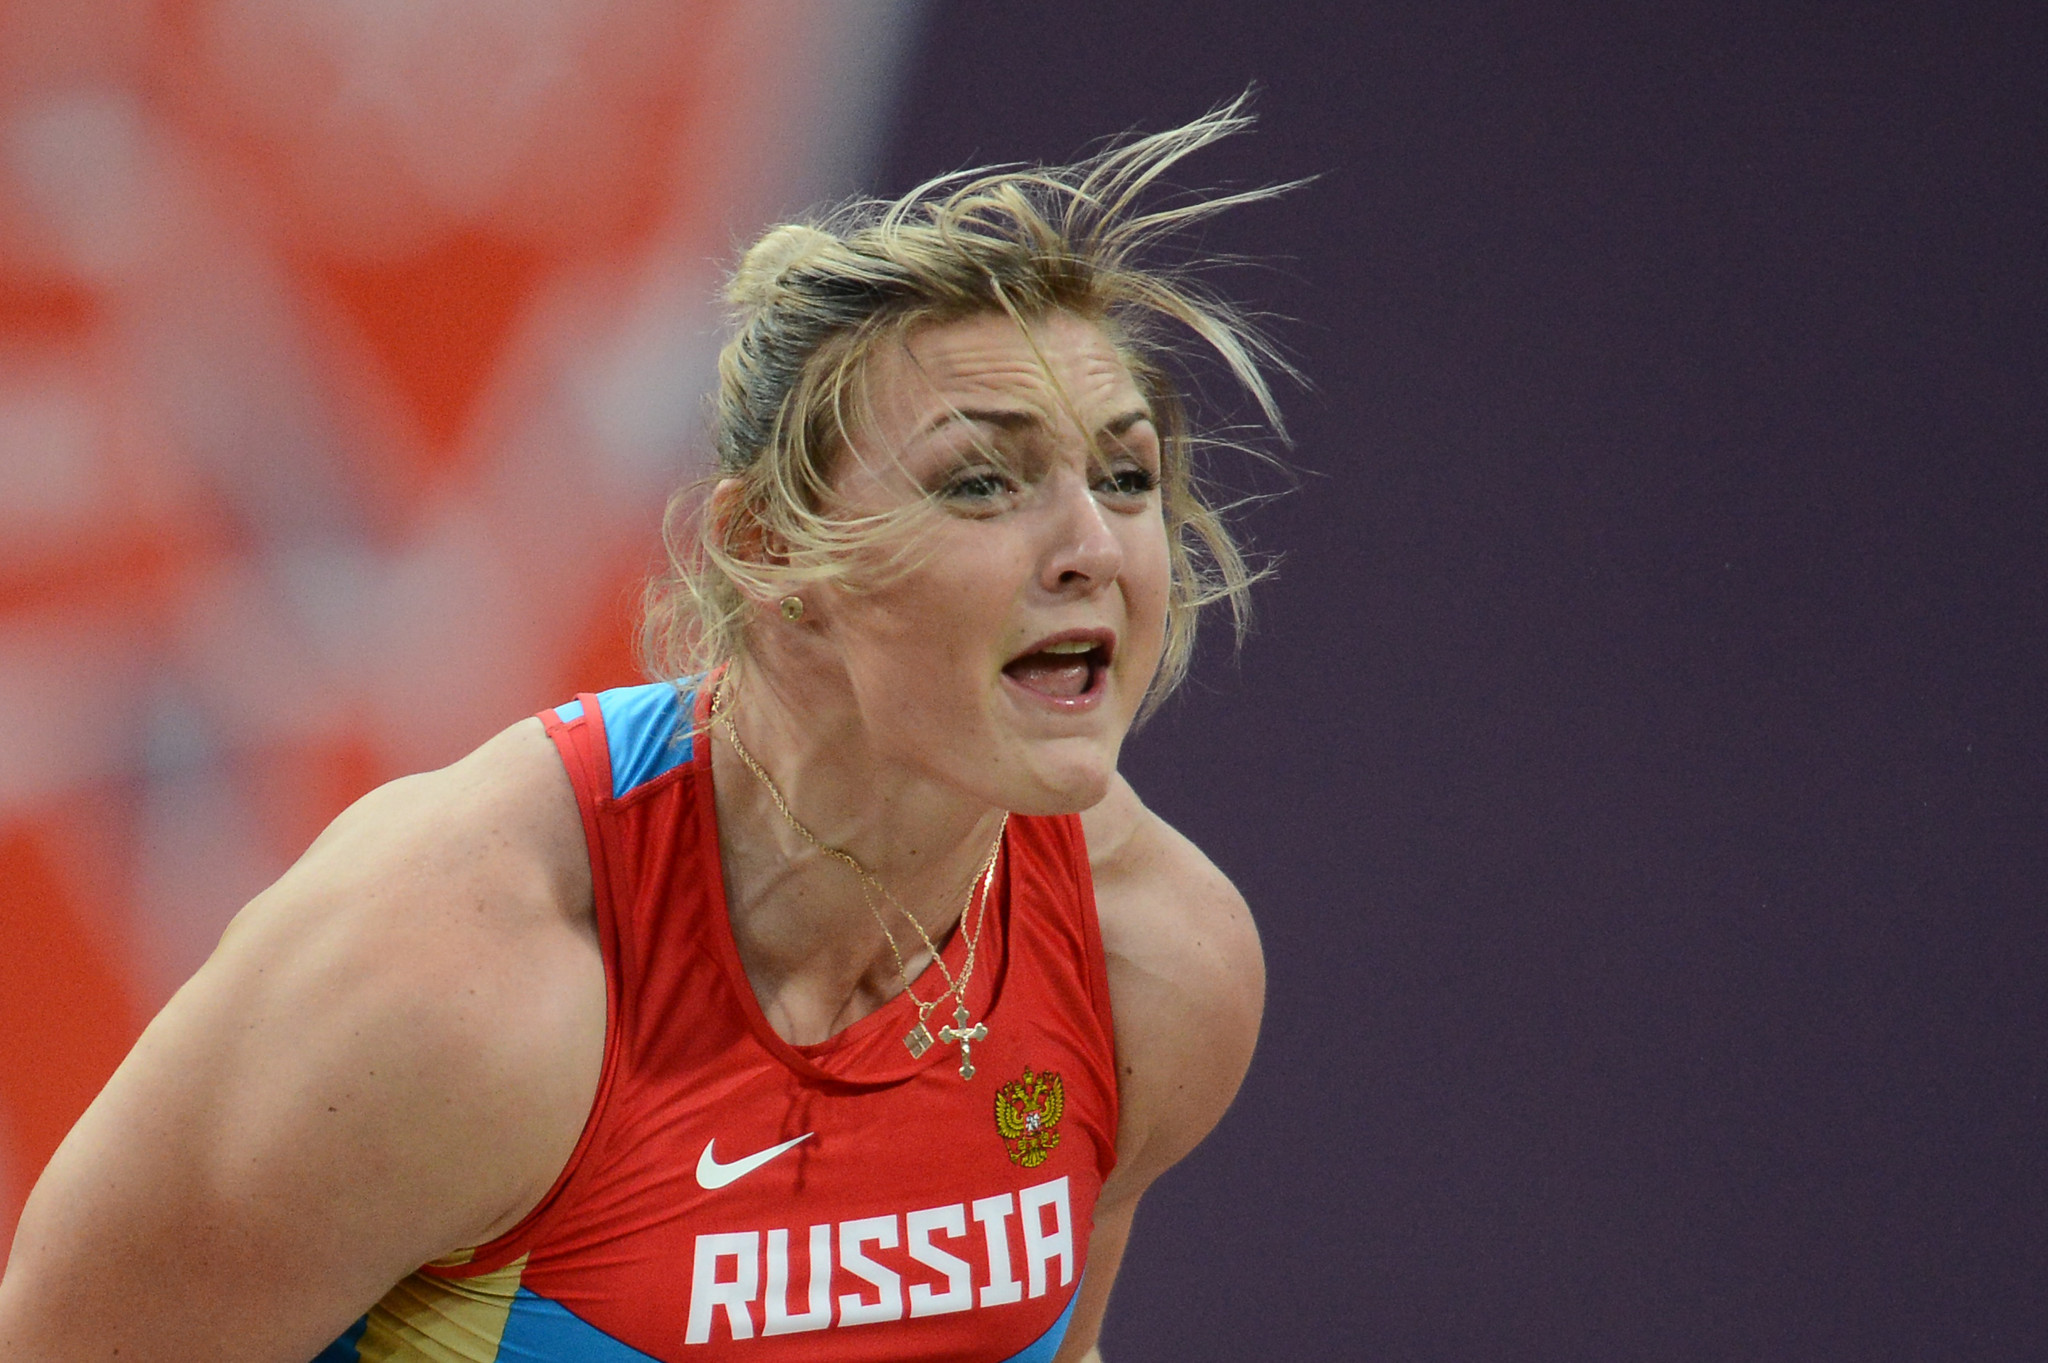 Yevgeniya Kolodko had already been stripped of the Olympic silver medal she had won at London 2012 because of a previous doping offence ©Getty Images